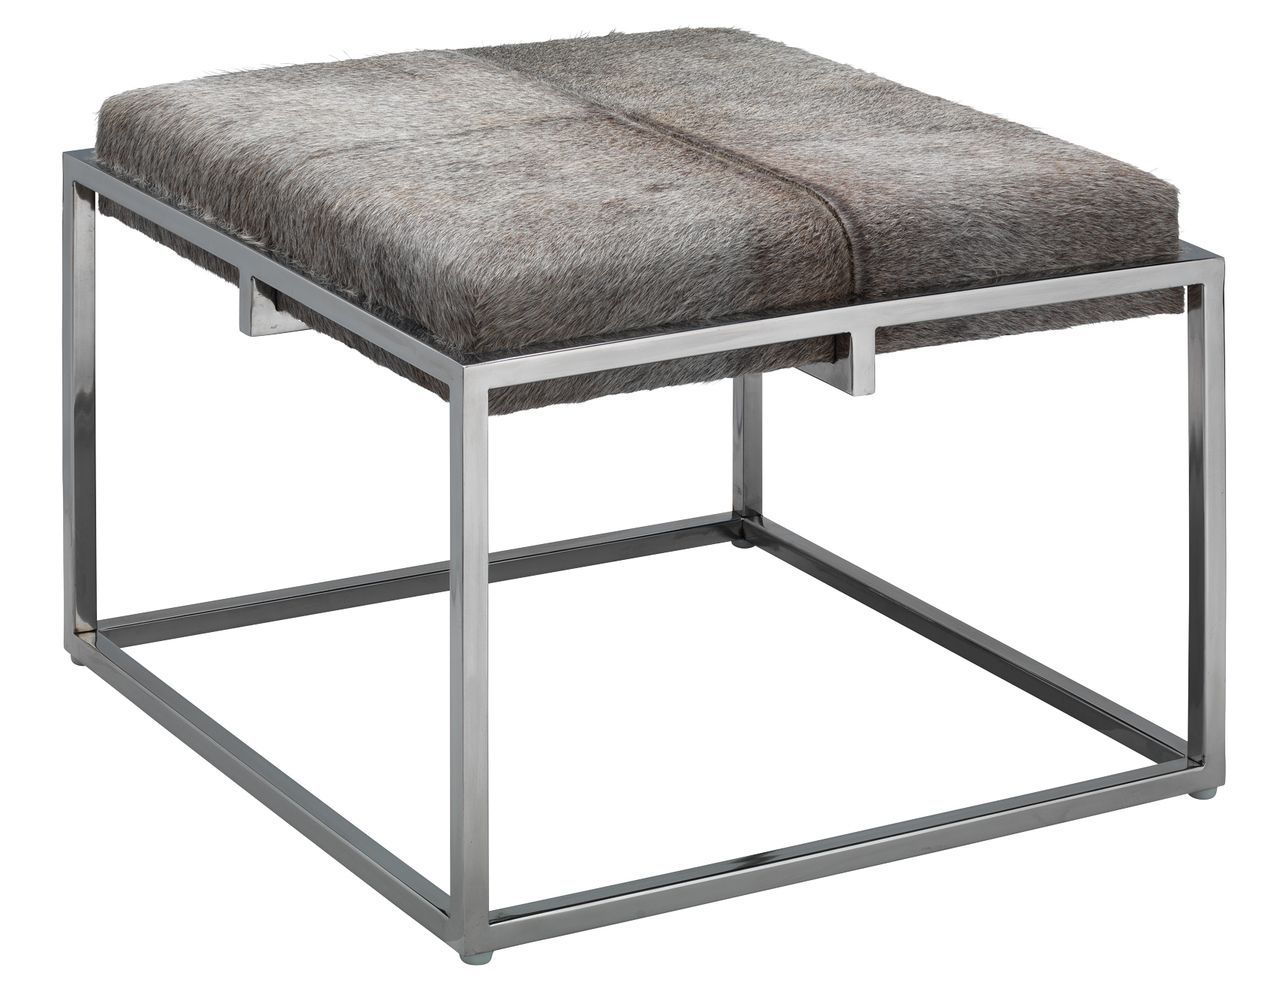 Jamie Young Large Shelby Stool In Grey Hide And Nickel | Metal Stool With Regard To Gray Nickel Stools (View 16 of 20)